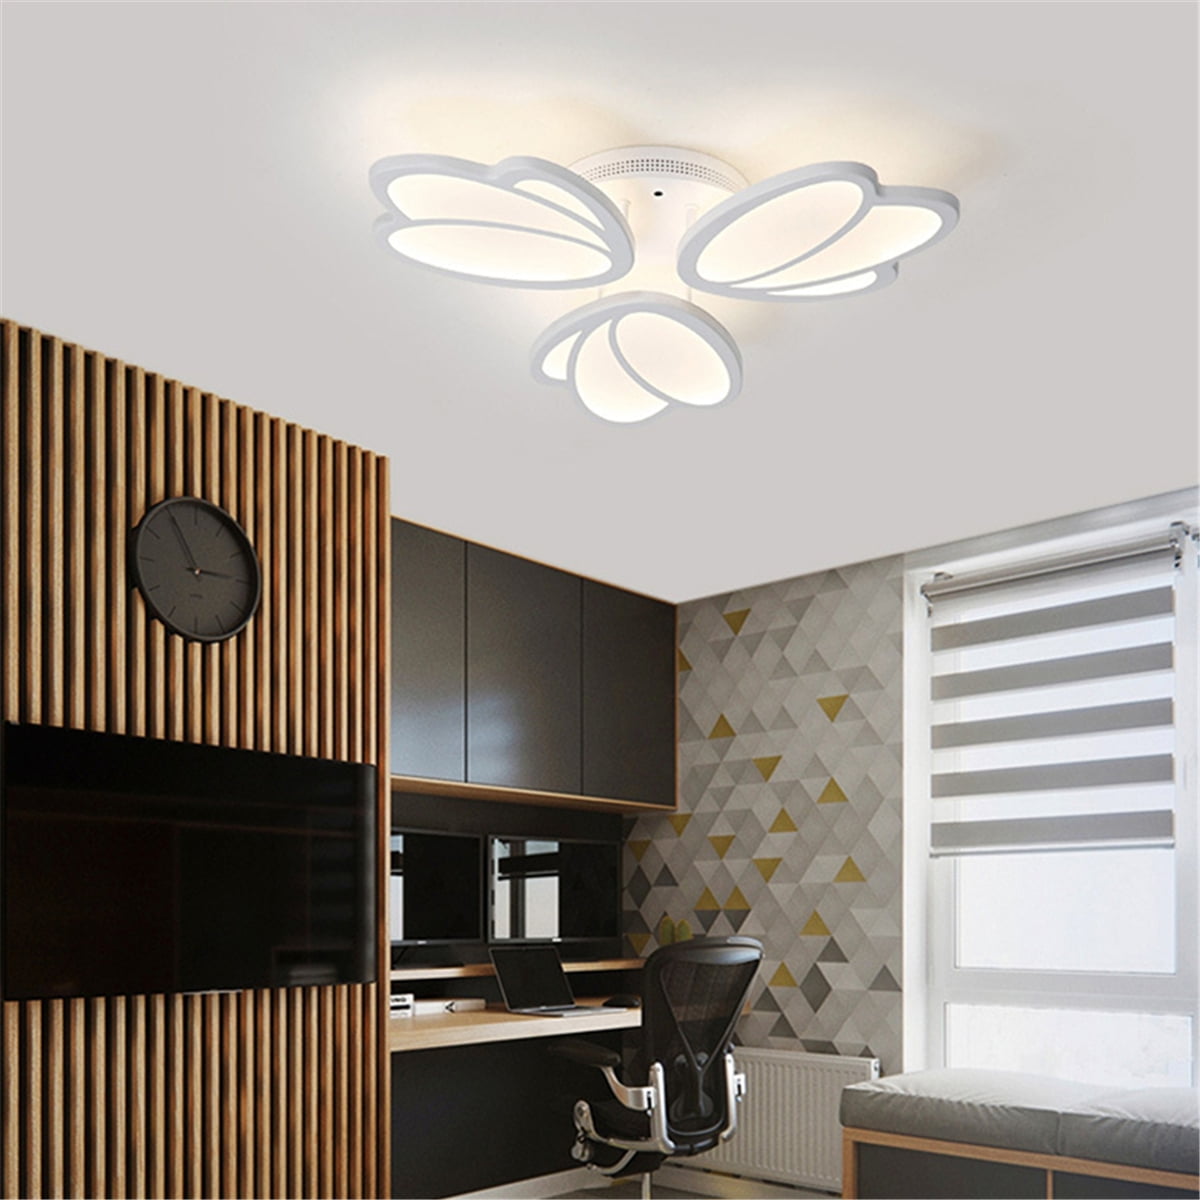 Ganeed Modern LED Flush Mount Lighting Fixture,Dimmable 8-Head Close to Ceiling Light Acrylic Chandeliers for Bedroom Living Room Dining Room Kitchen Office 120W//3000-6500K